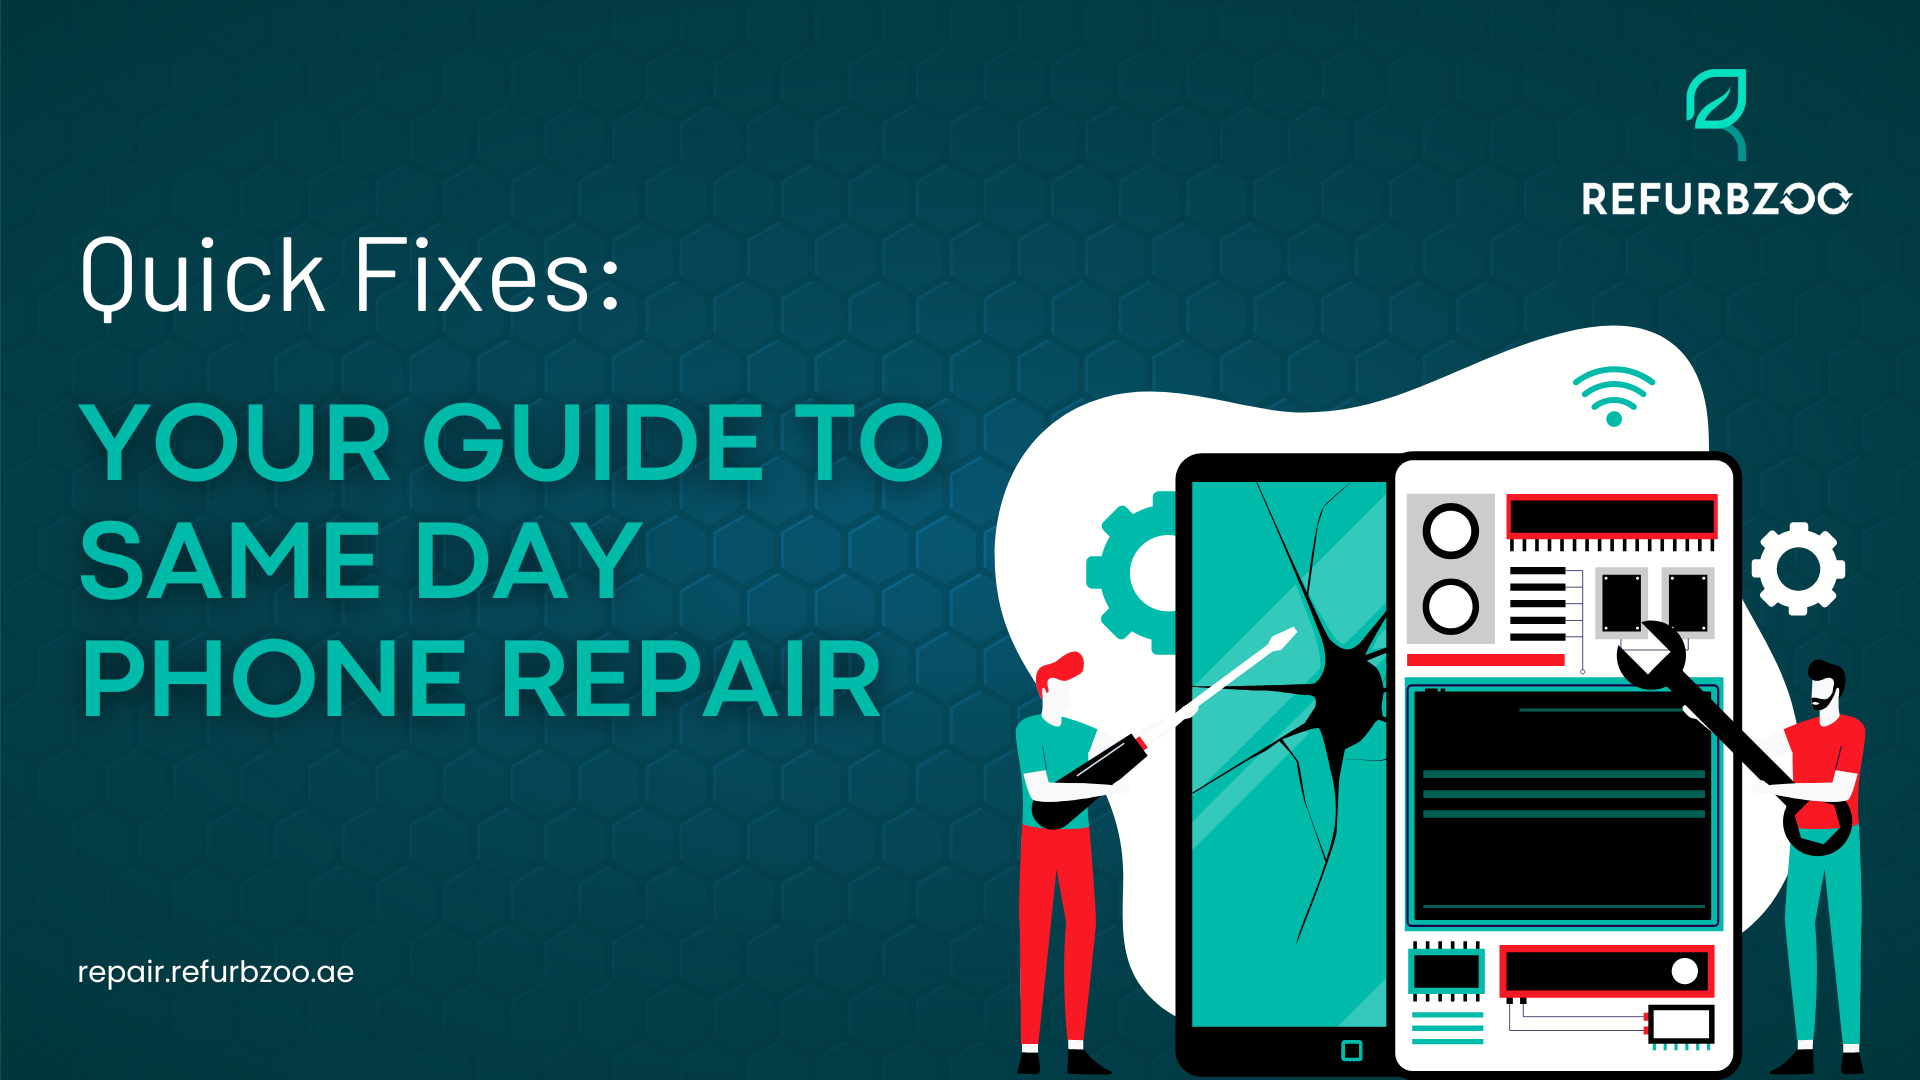 Quick Fixes: Your Guide to Same Day Phone Repair